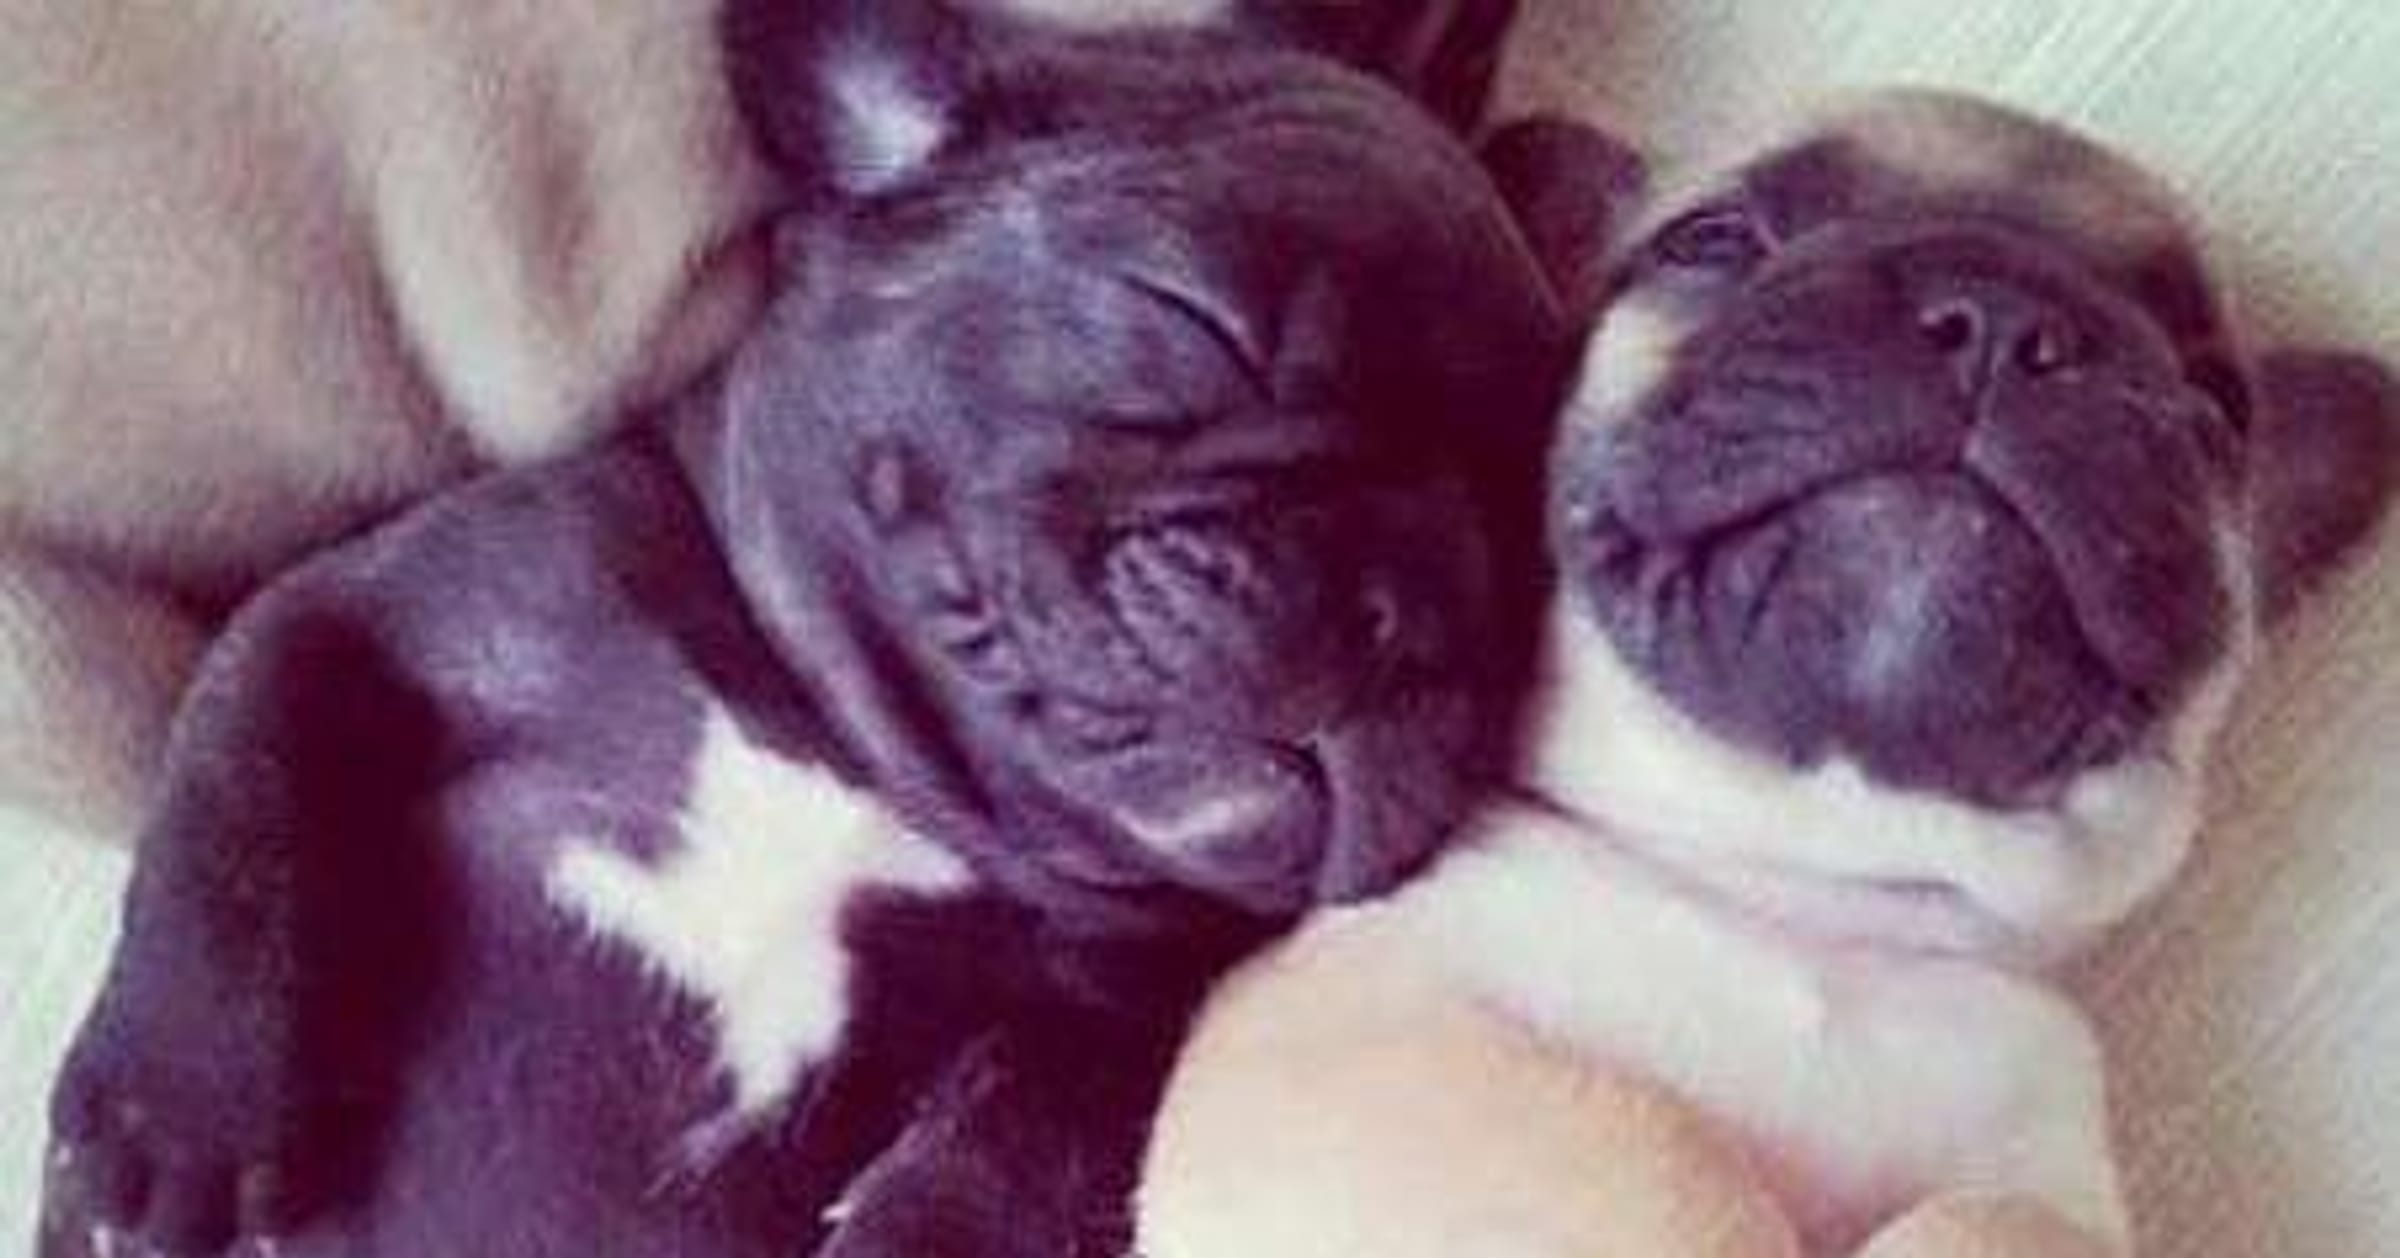 cutest pugs in the world